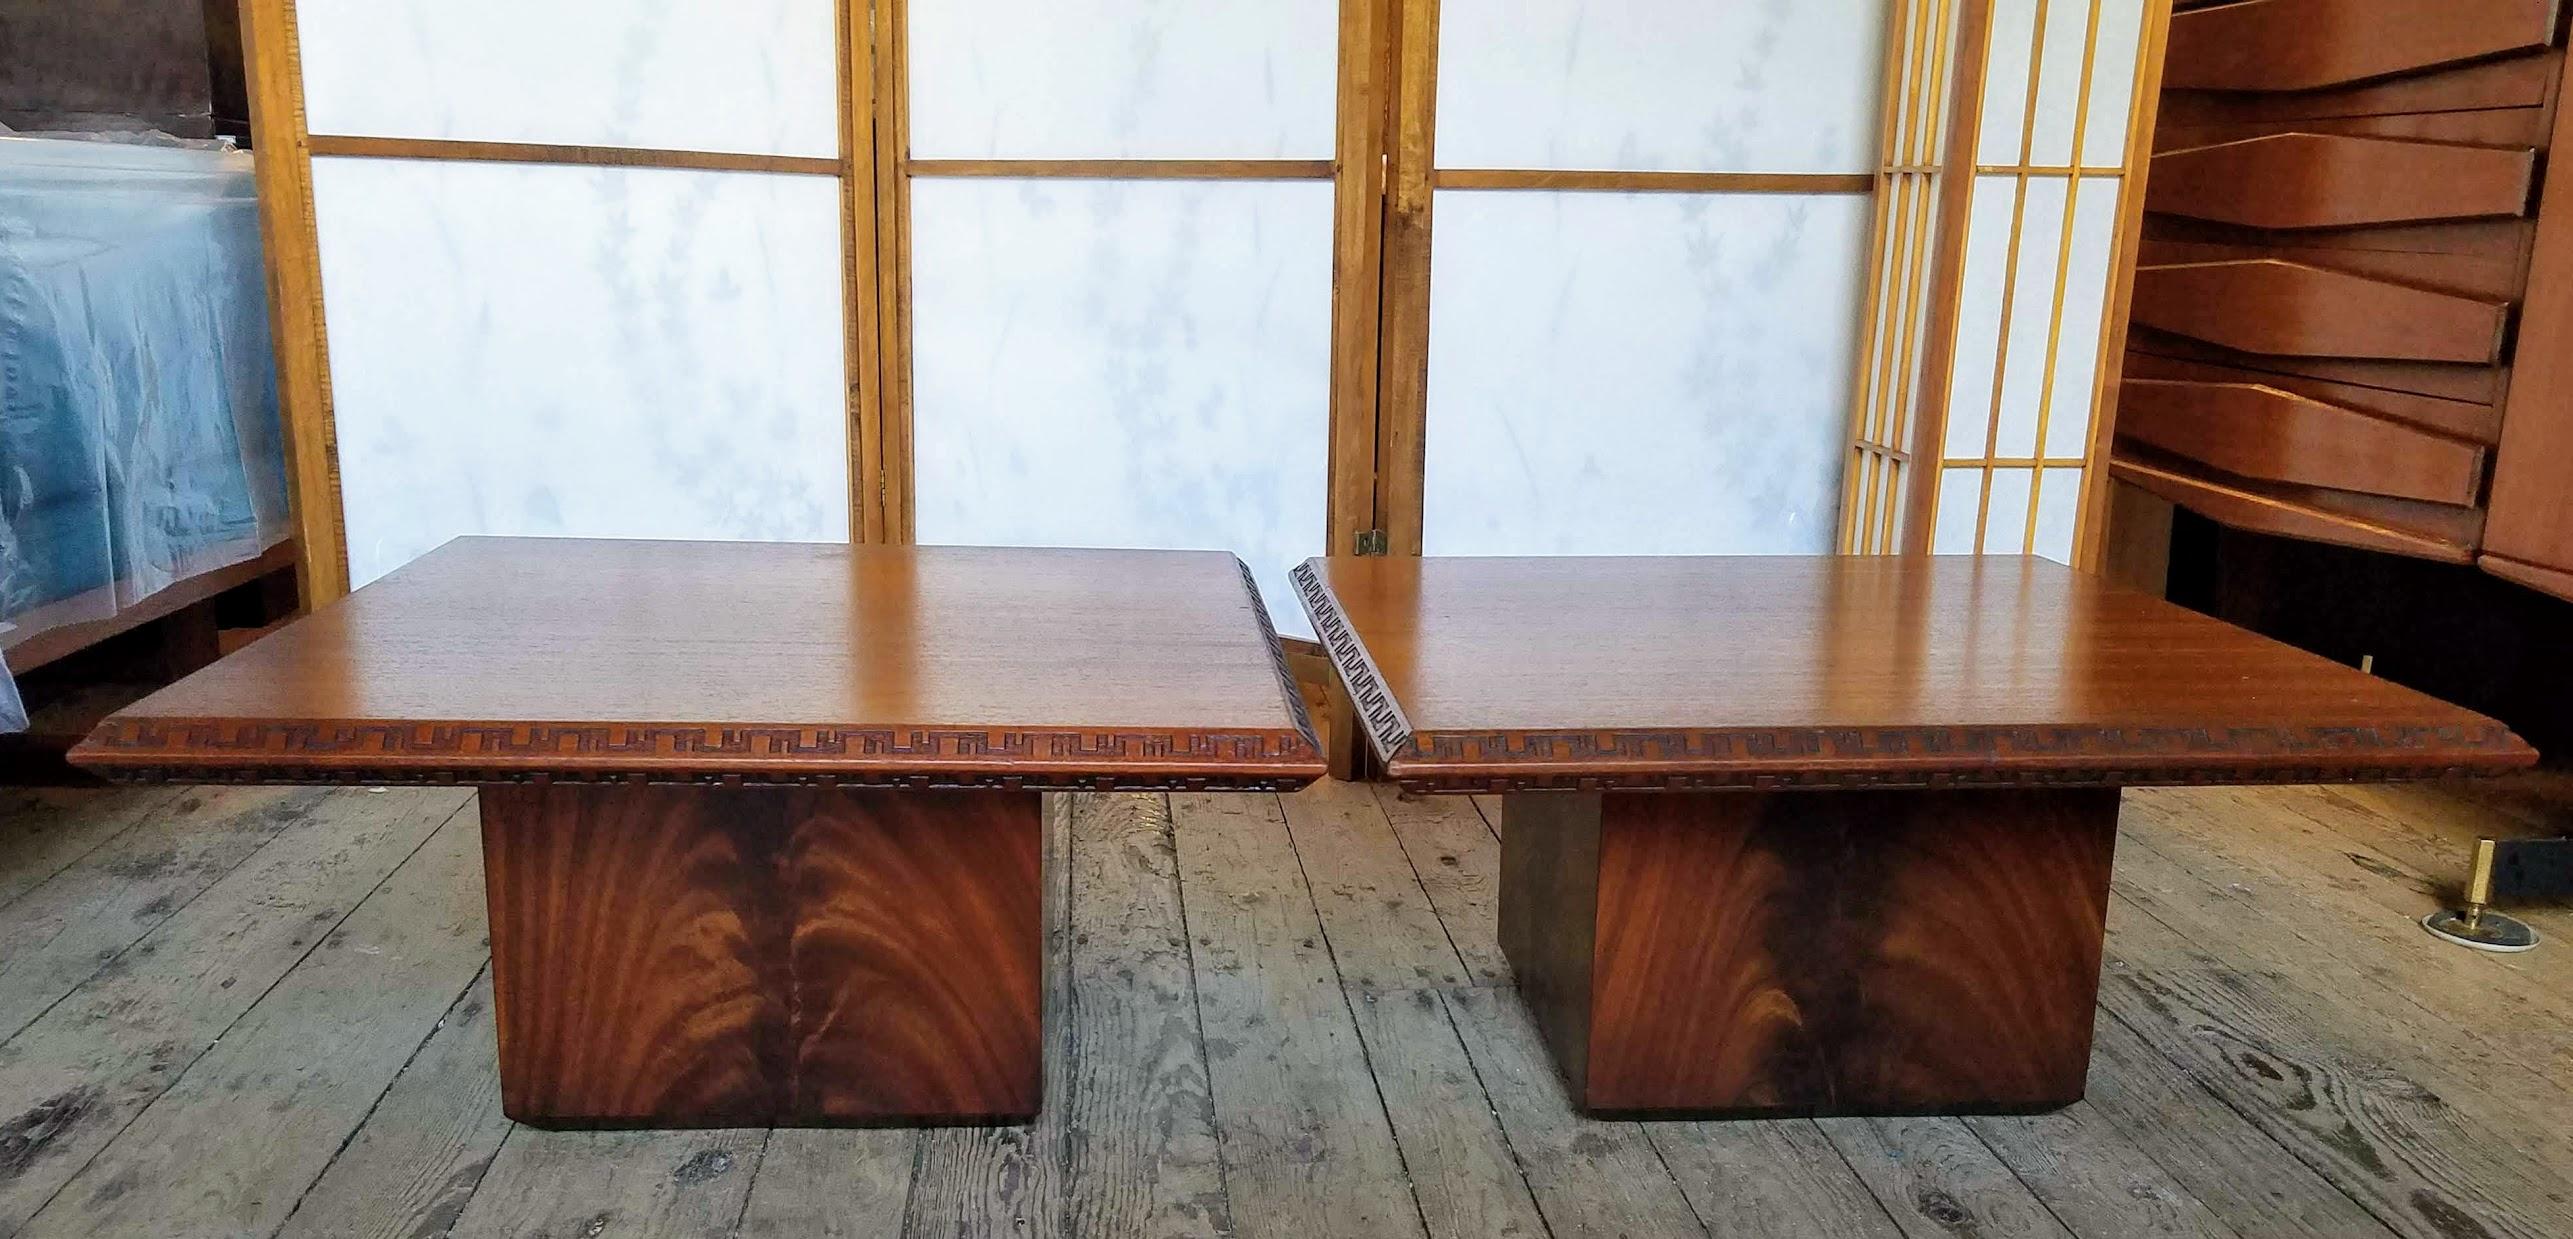 Frank Lloyd Wright pair of mahogany coffee tables or small coffee tables designed for Heritage Henredon for their Taliesin line introduced in 1955.
Both tables are signed and dated with their model numbers.
The tables are in excellent